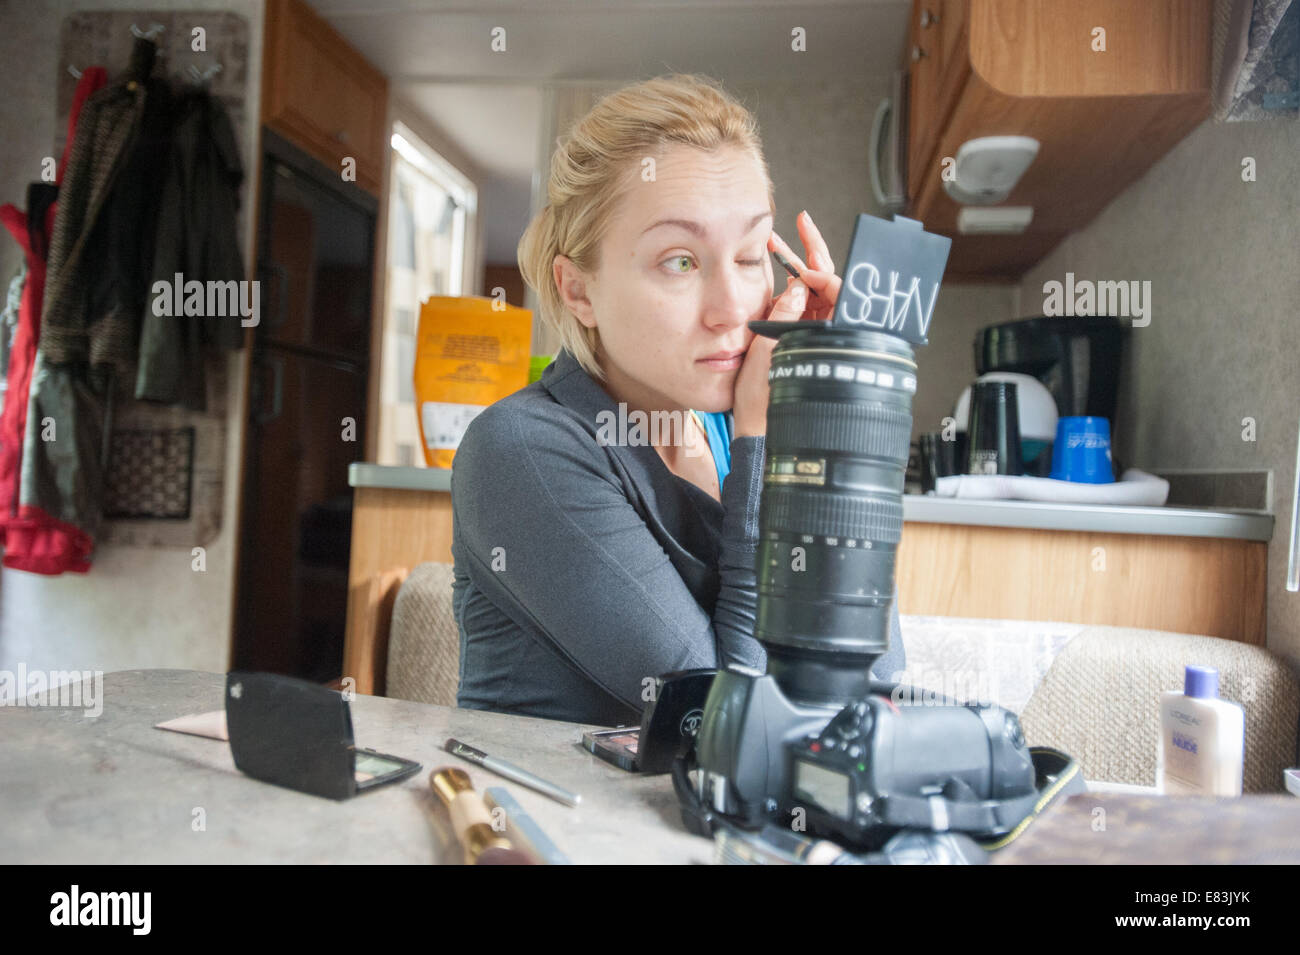 Model applies makeup in RV using camera as mirror stand Stock Photo